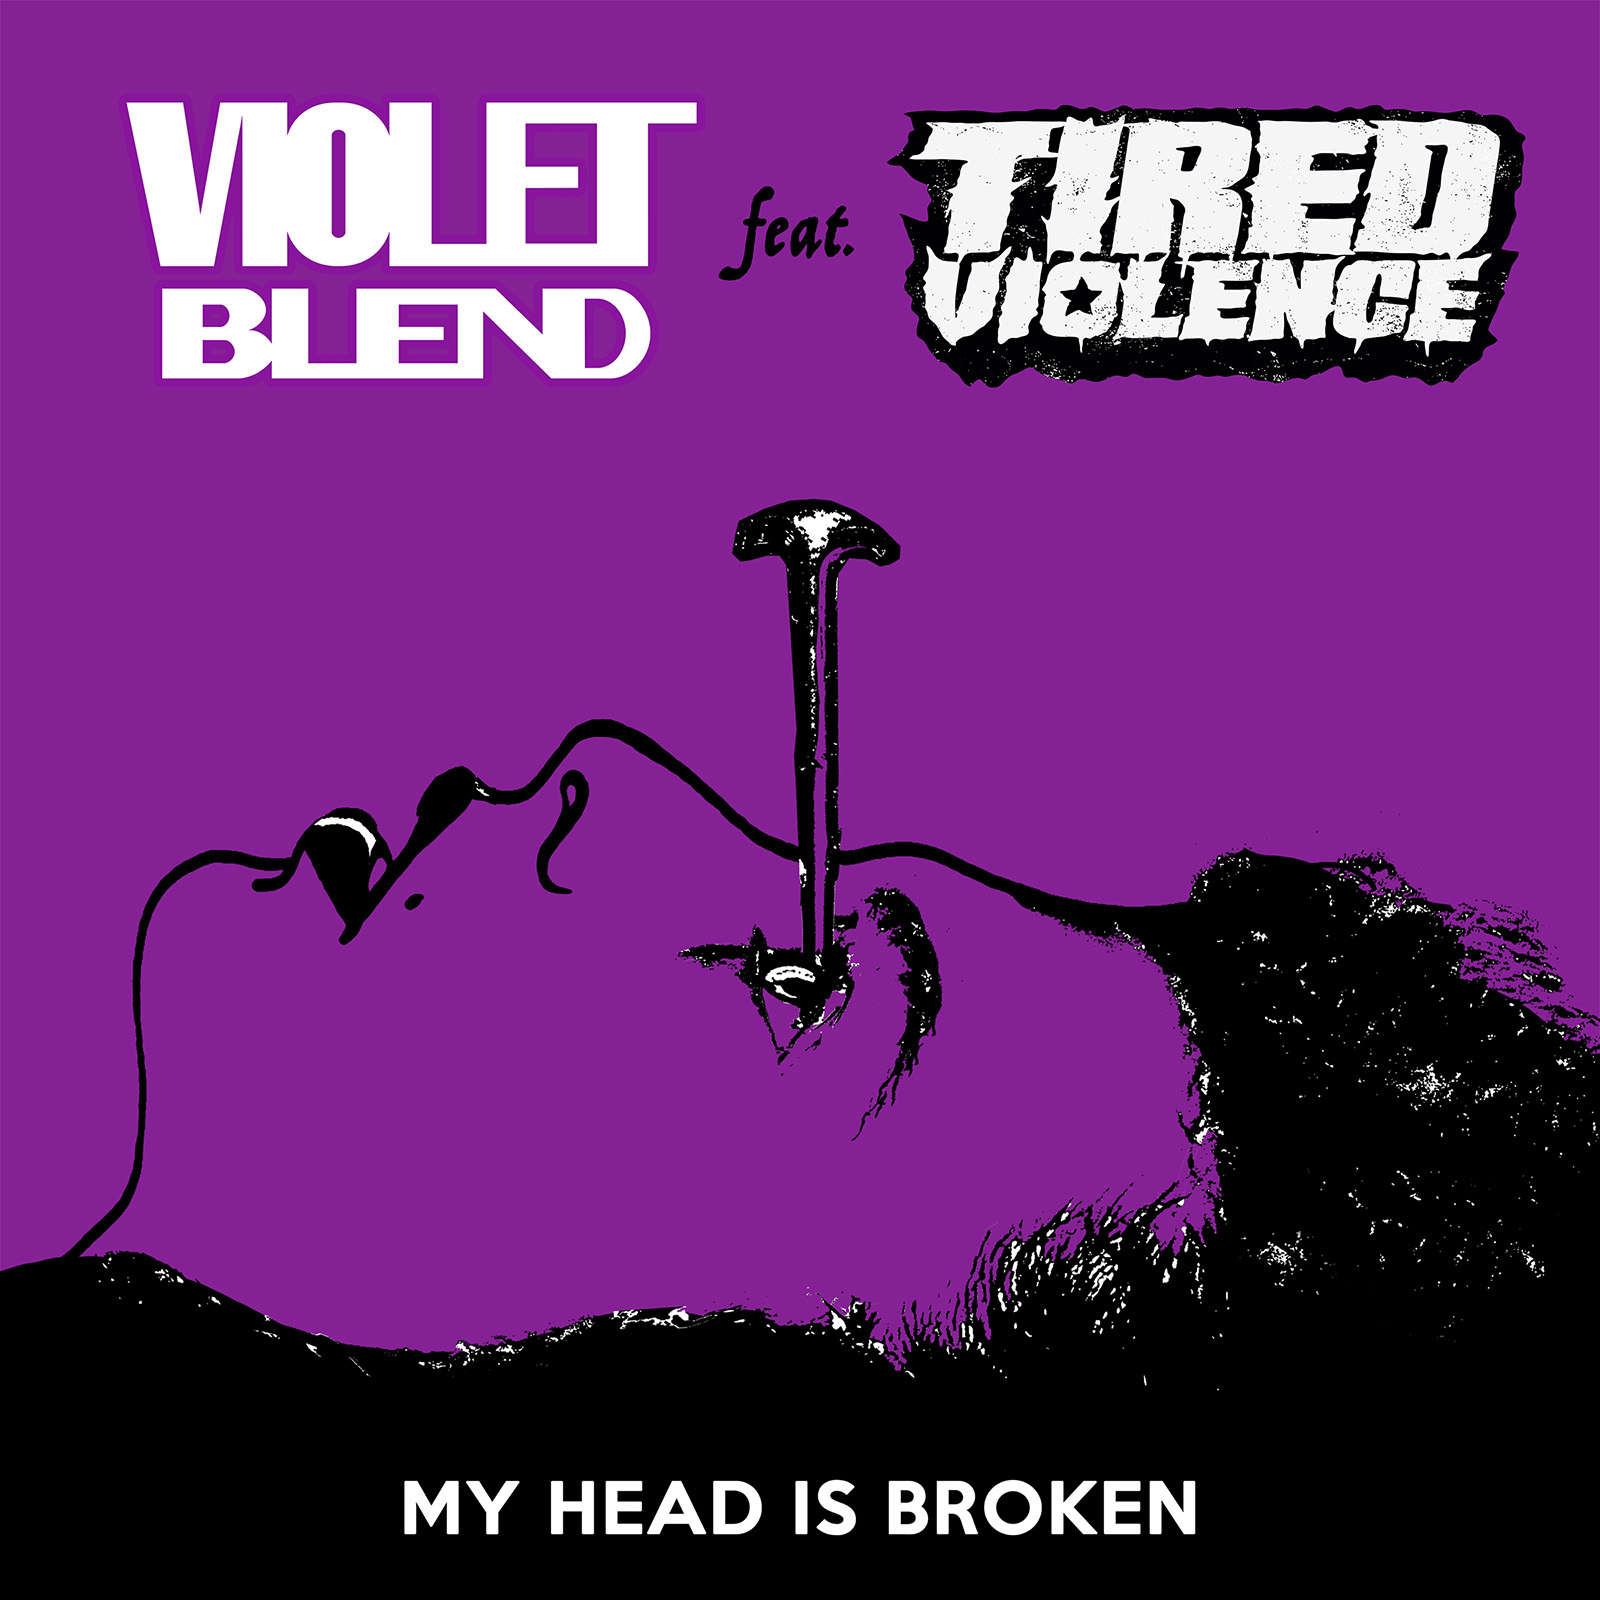 HOT TRACK: “My Head is Broken” by Violet Blend featuring Tired Violence